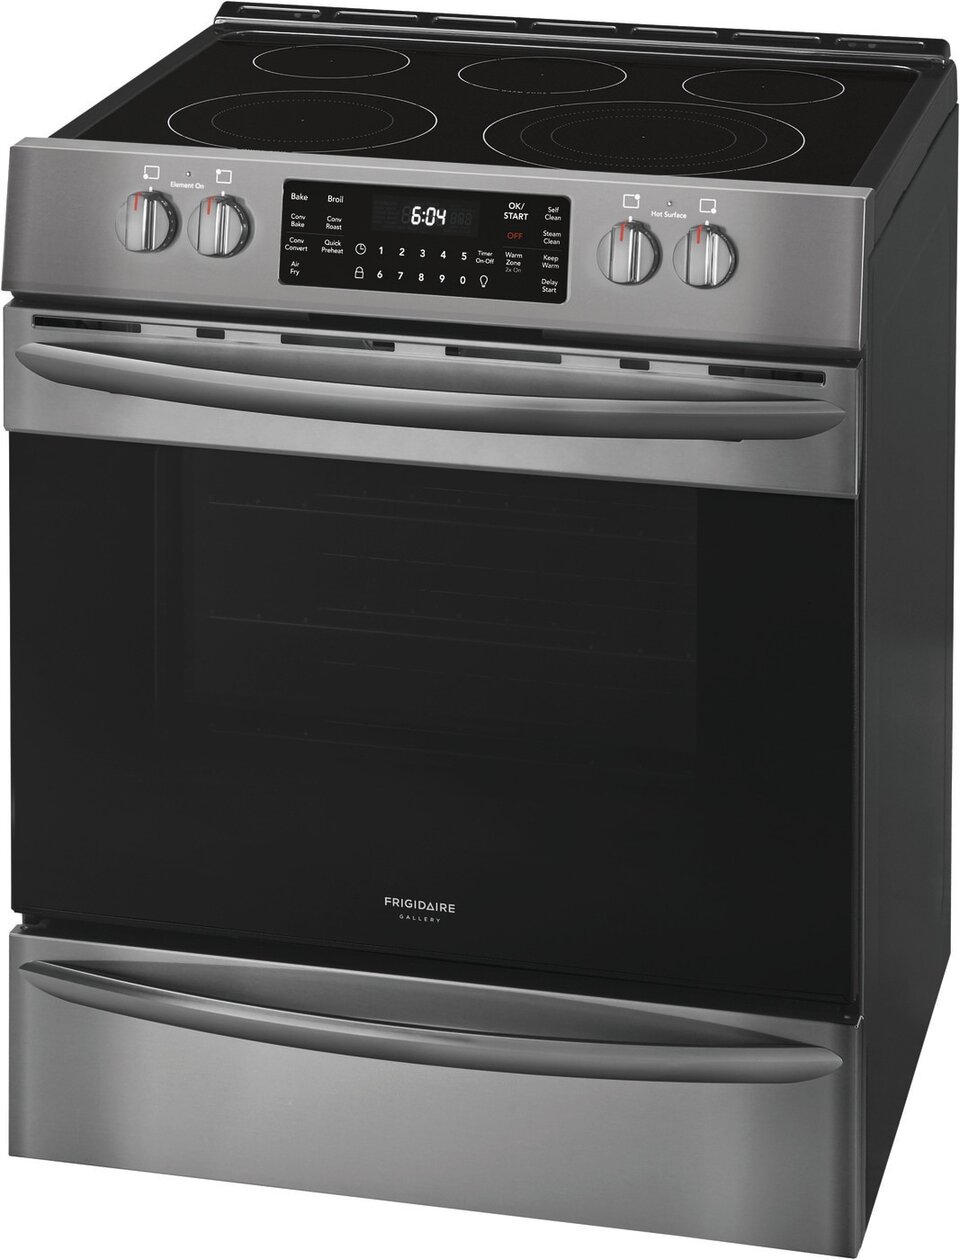 Frigidaire Gallery FGEH3047VF 30 inch Electric Range with Air Fry